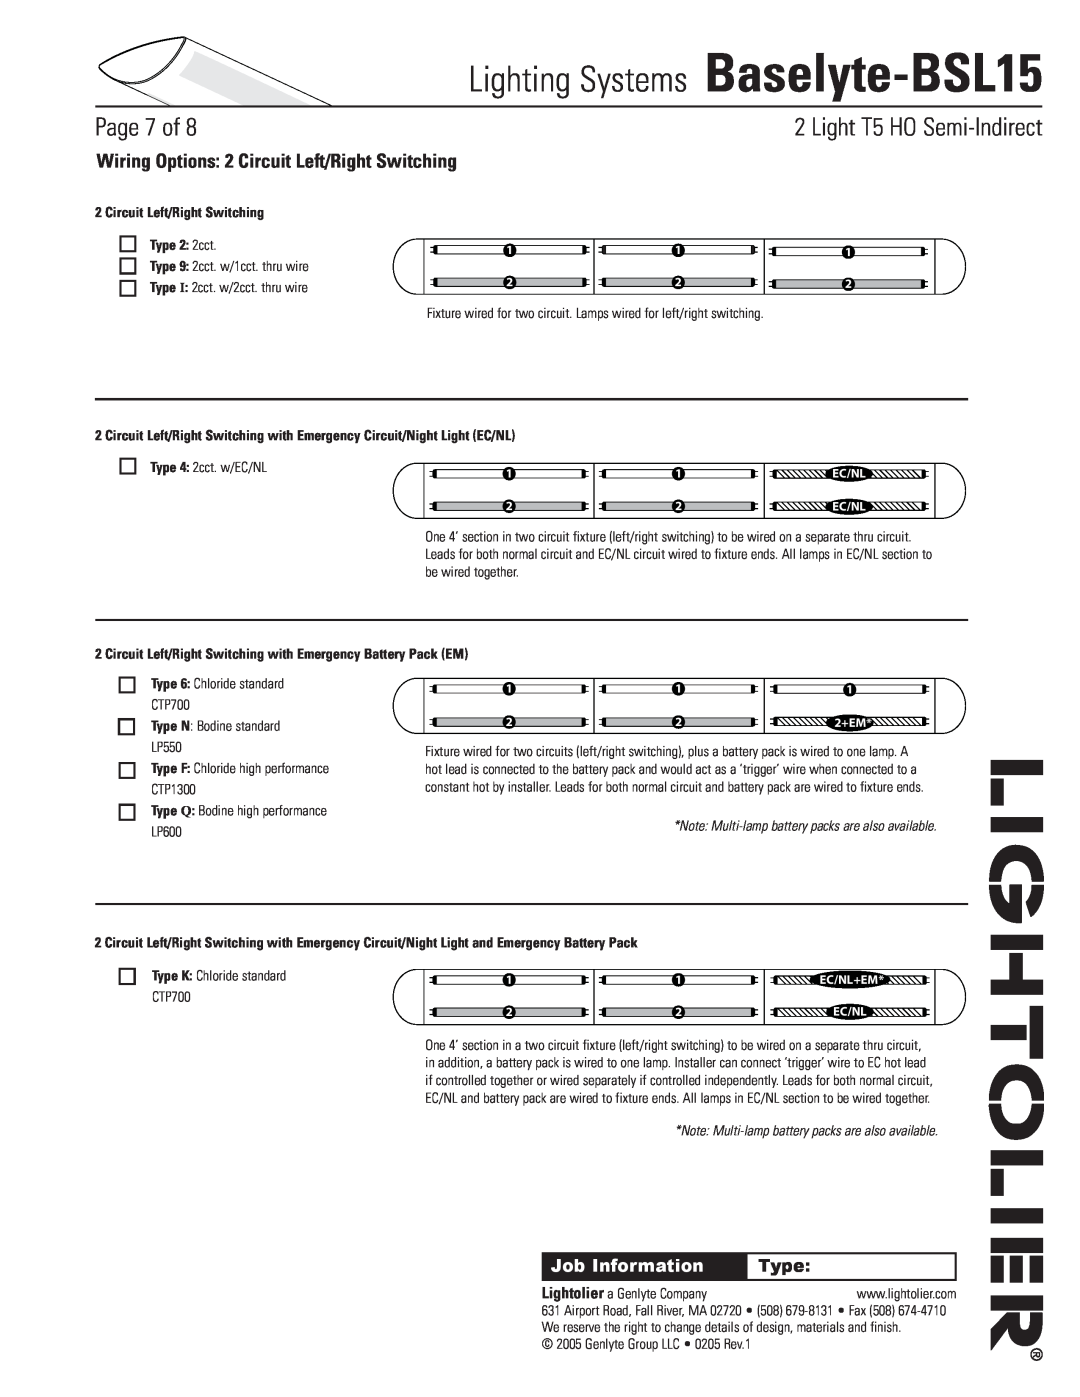 Lightolier Baselyte-BSL15 Wiring Options 2 Circuit Left/Right Switching, Circuit Left/Right Switching Type 2 2cct, Page of 